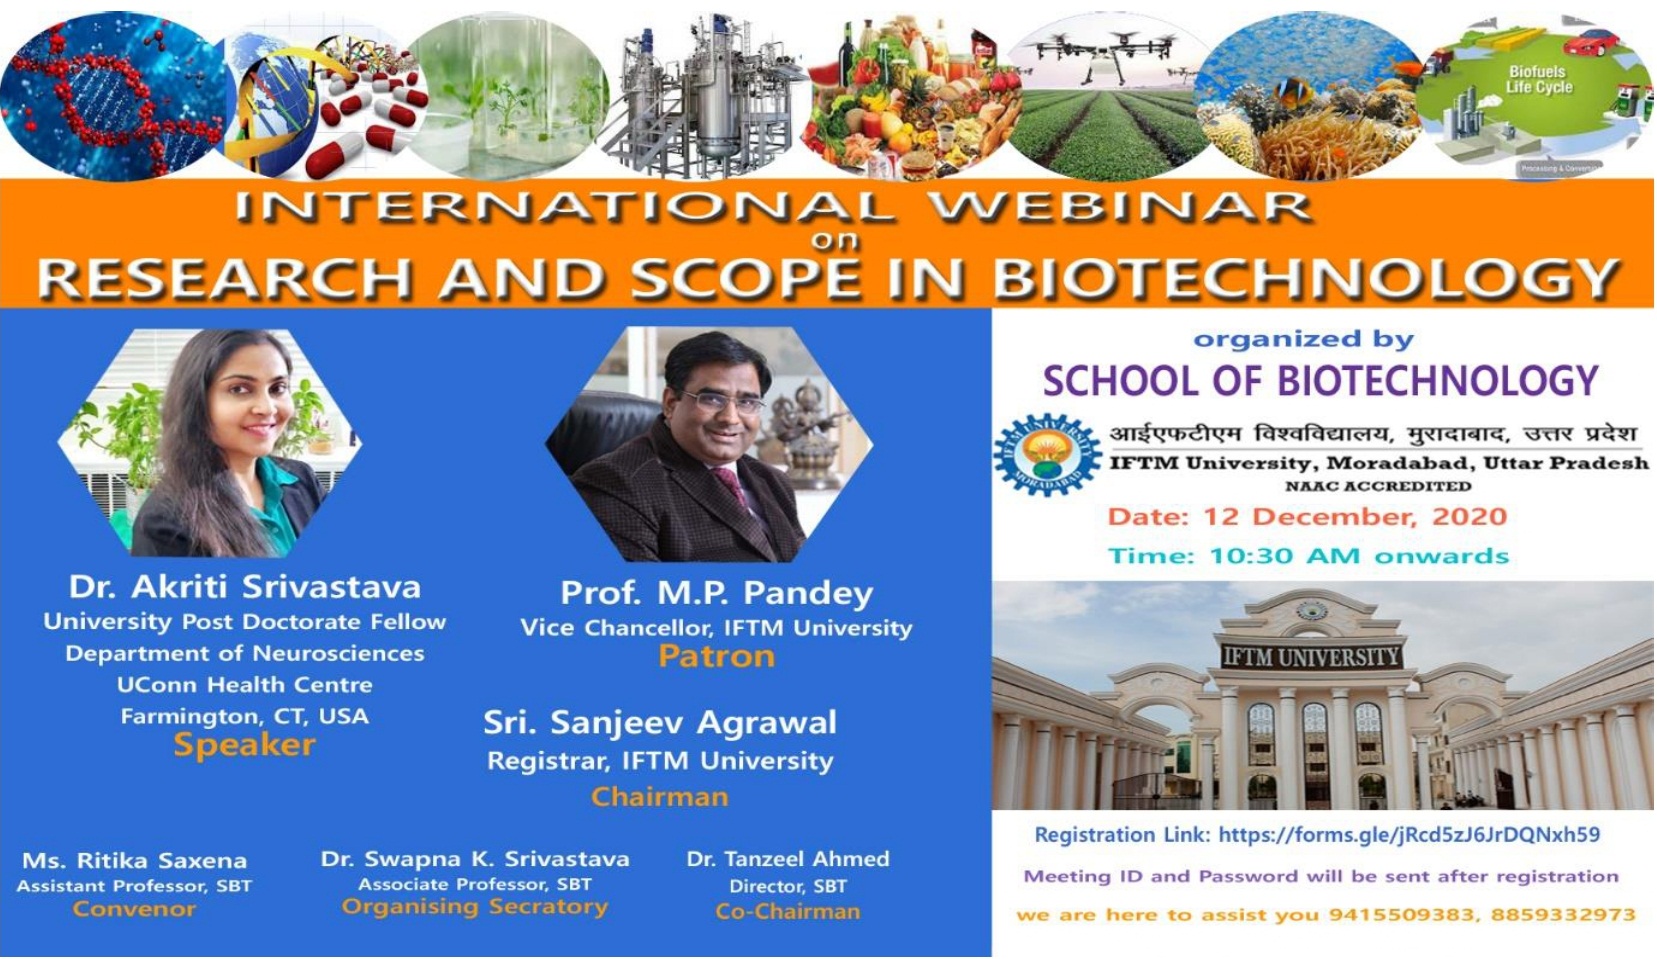 International Webinar: Research and Scope in Biotechnology